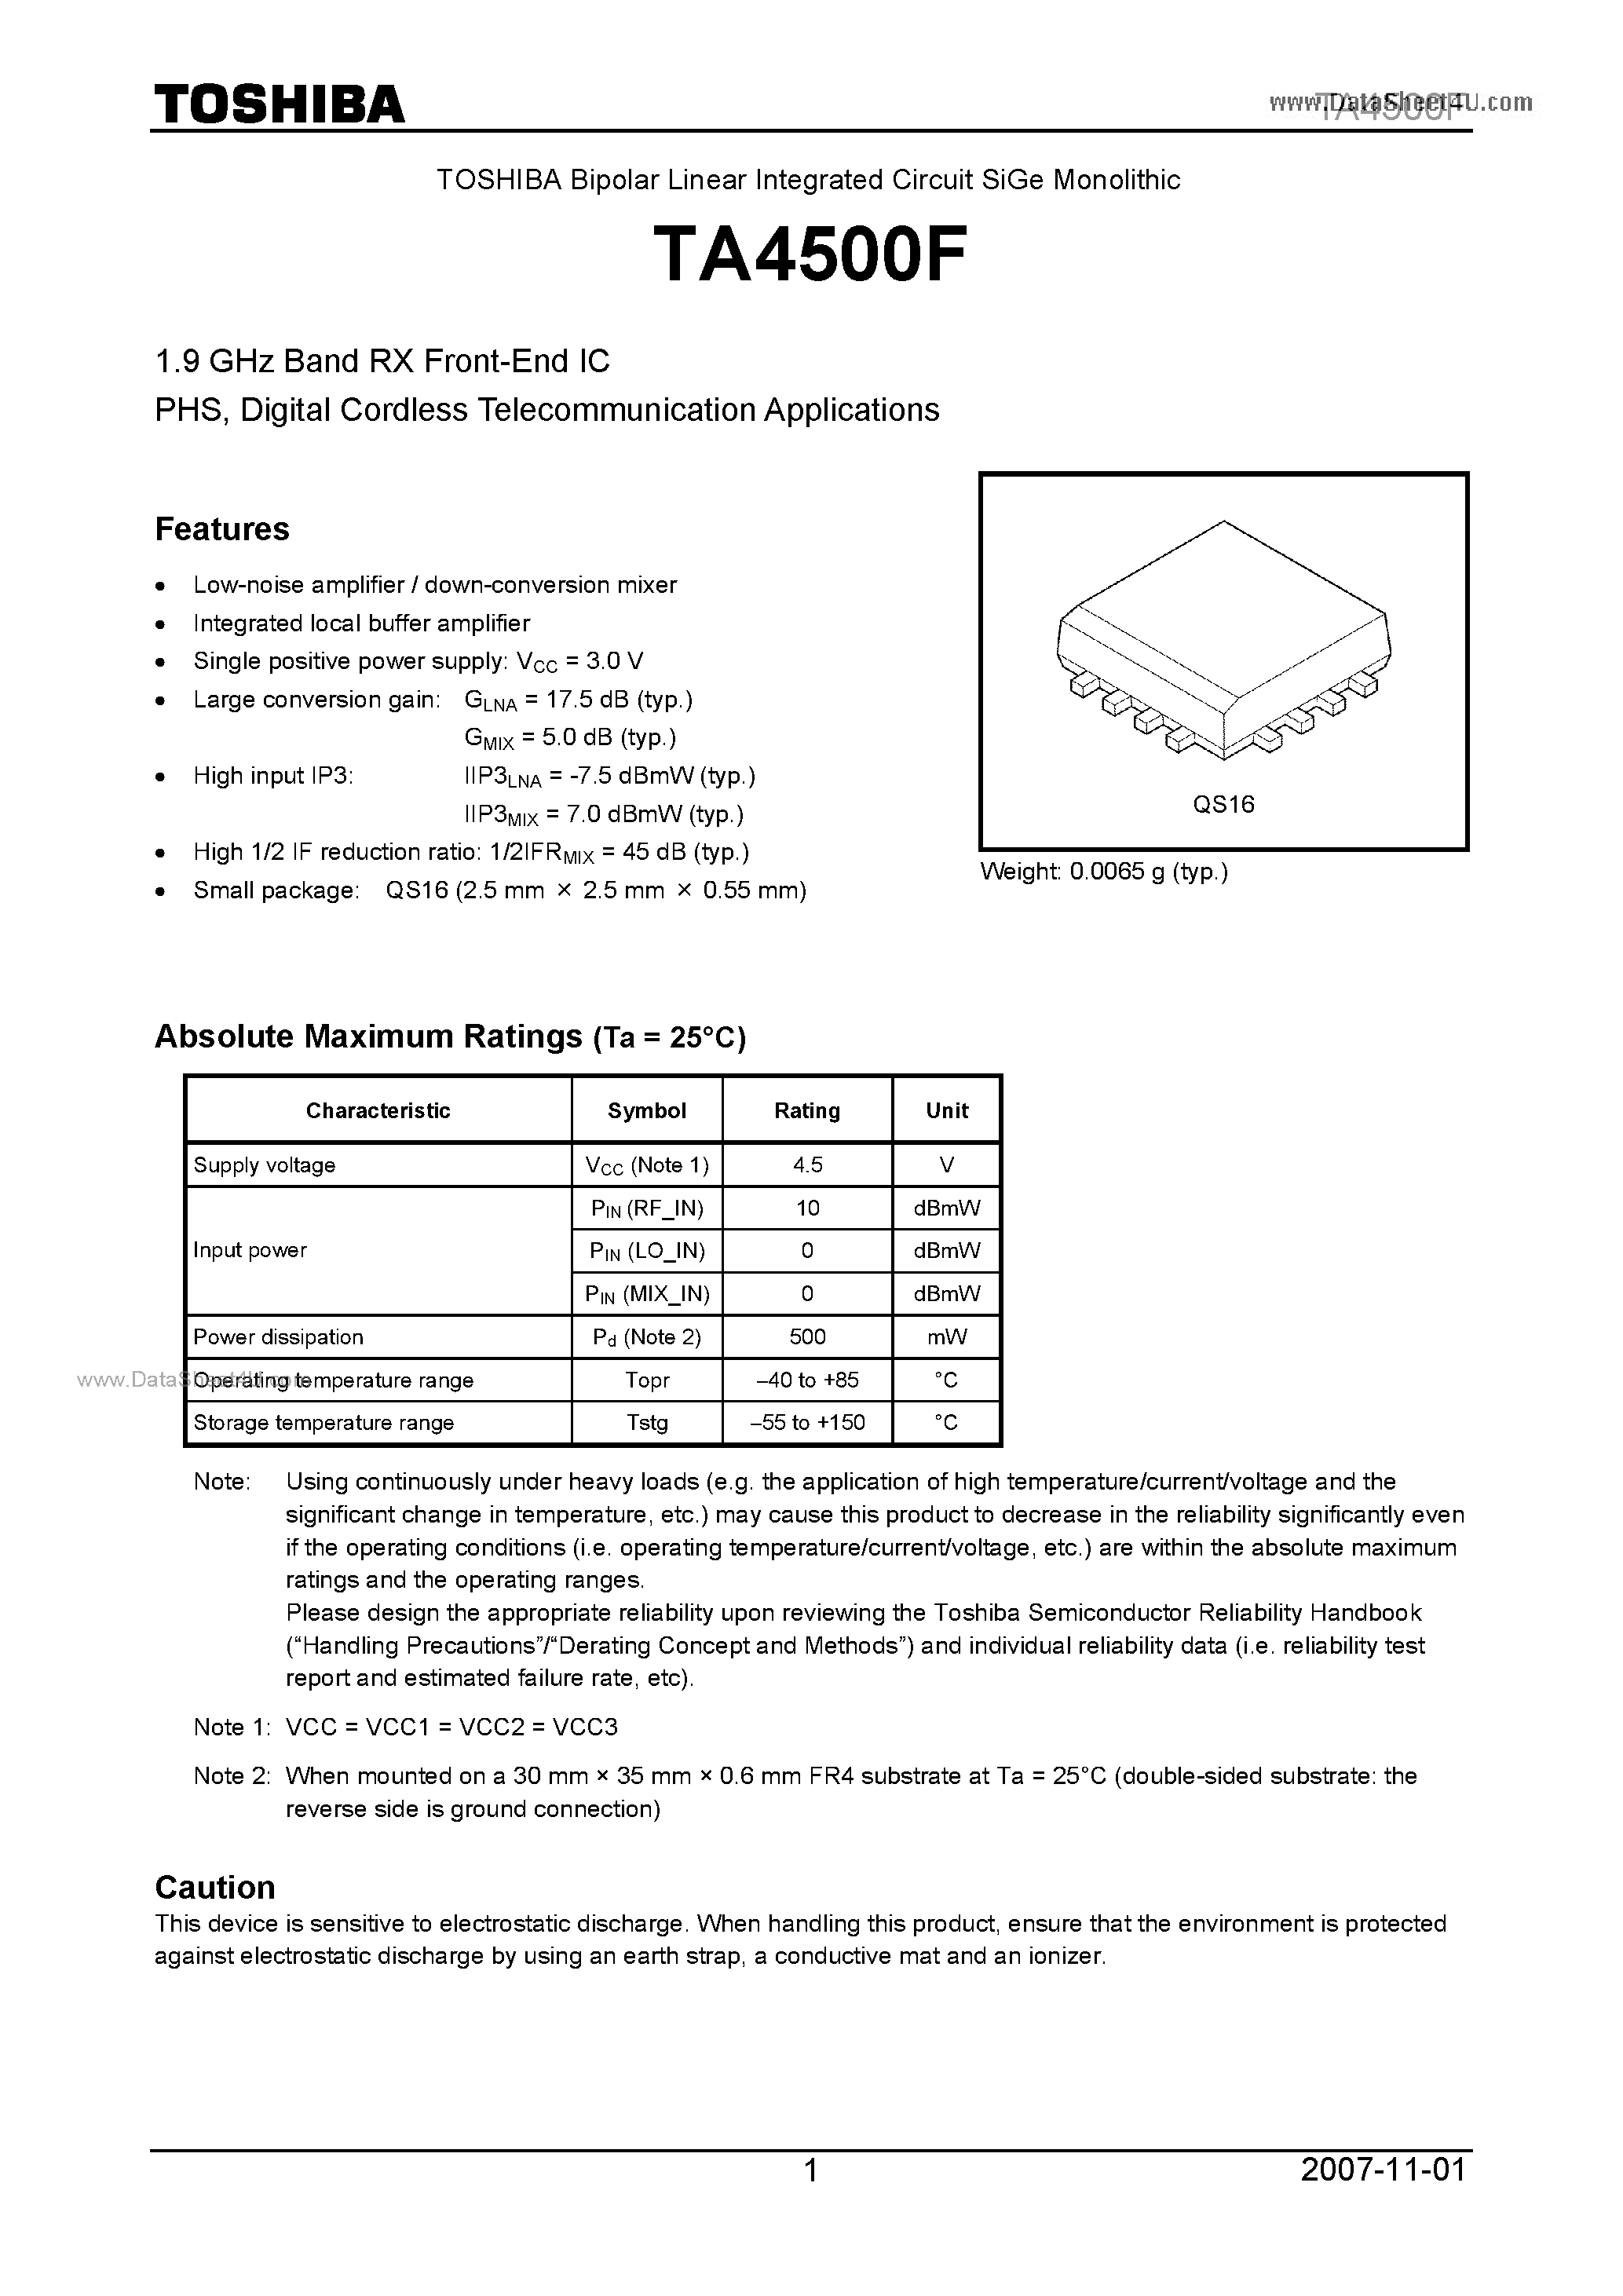 Datasheet TA4500F - 1.9 GHz Band RX Front-End IC page 1